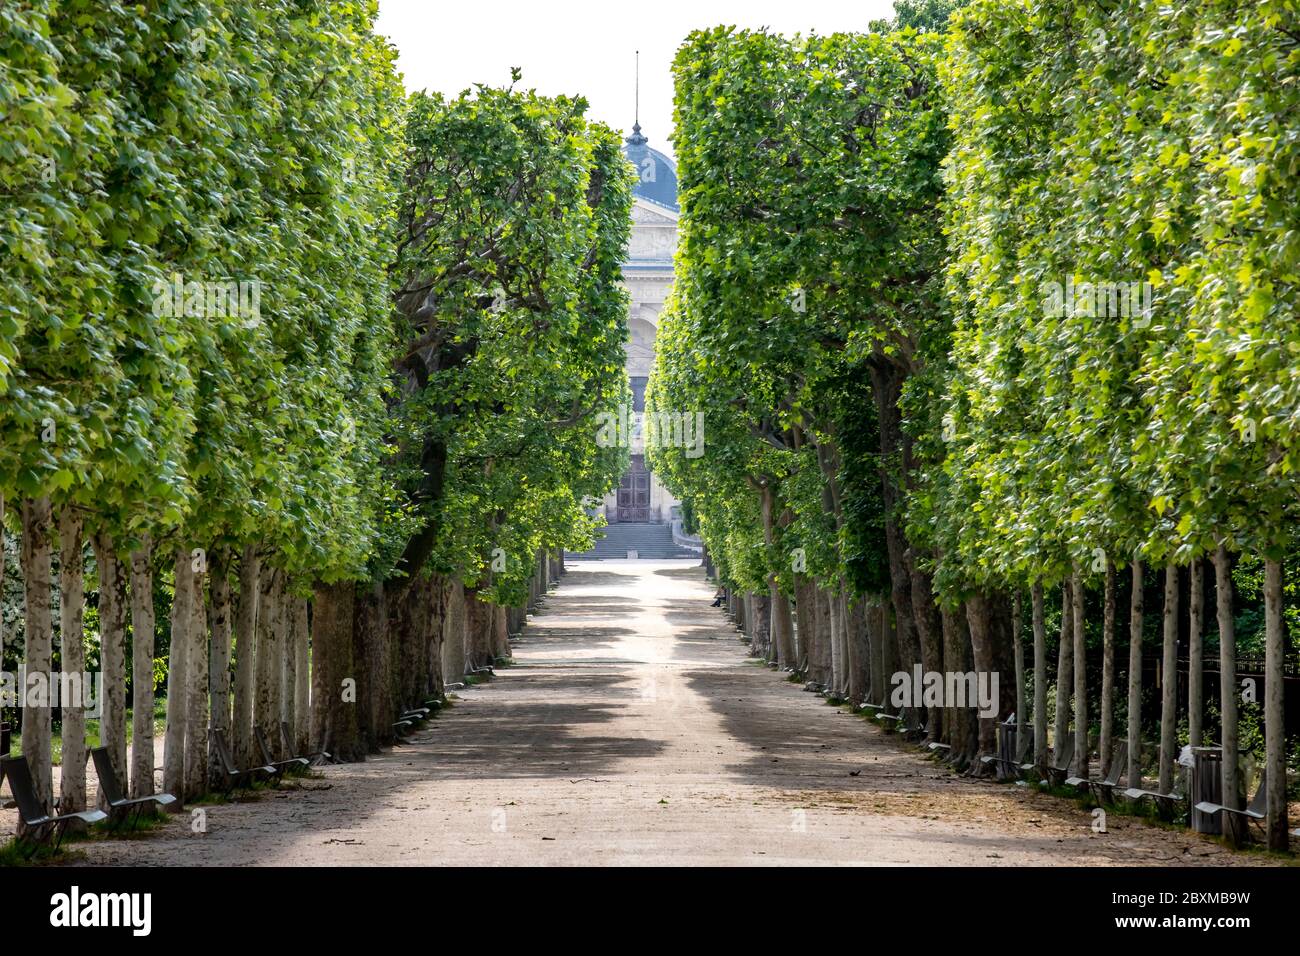 Paris, France - April 25, 2020: The Jardin des plantes (french for garden of the plants) is the main botanical garden in France. Located in Paris, it Stock Photo